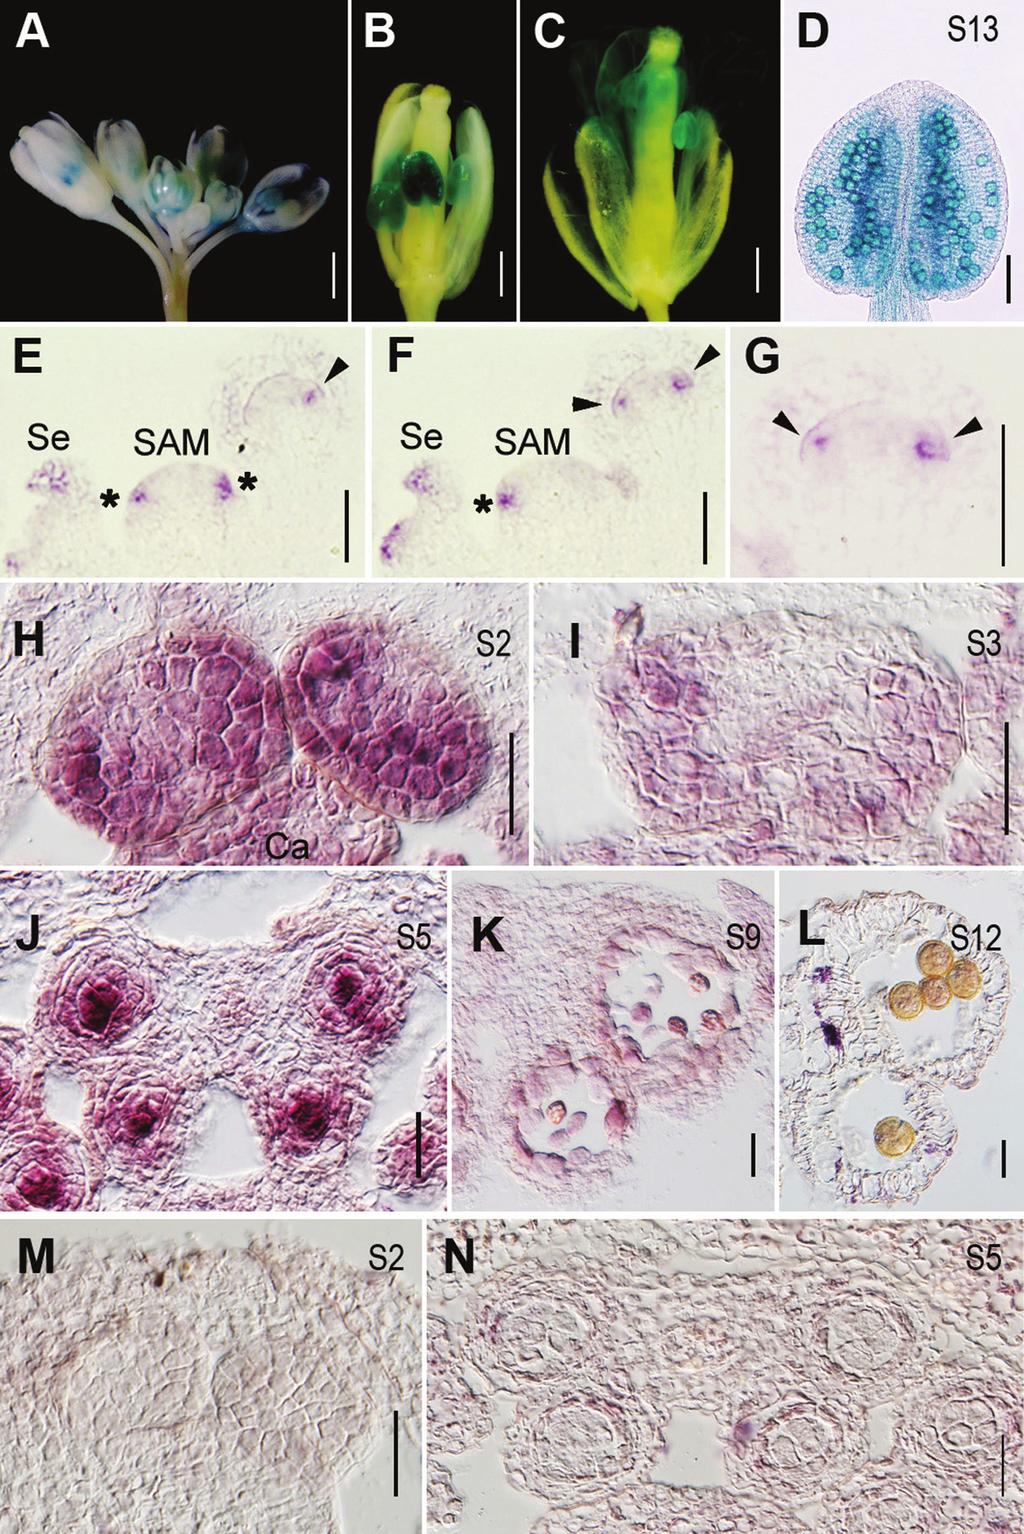 3404 Lian et al. Fig. 5. Temporal and spatial expression of HYL1. (A D) GUS staining of HYL1 in phyl1::gus transgenic plants. (A) Flower buds showing HYL1 expression in anthers.